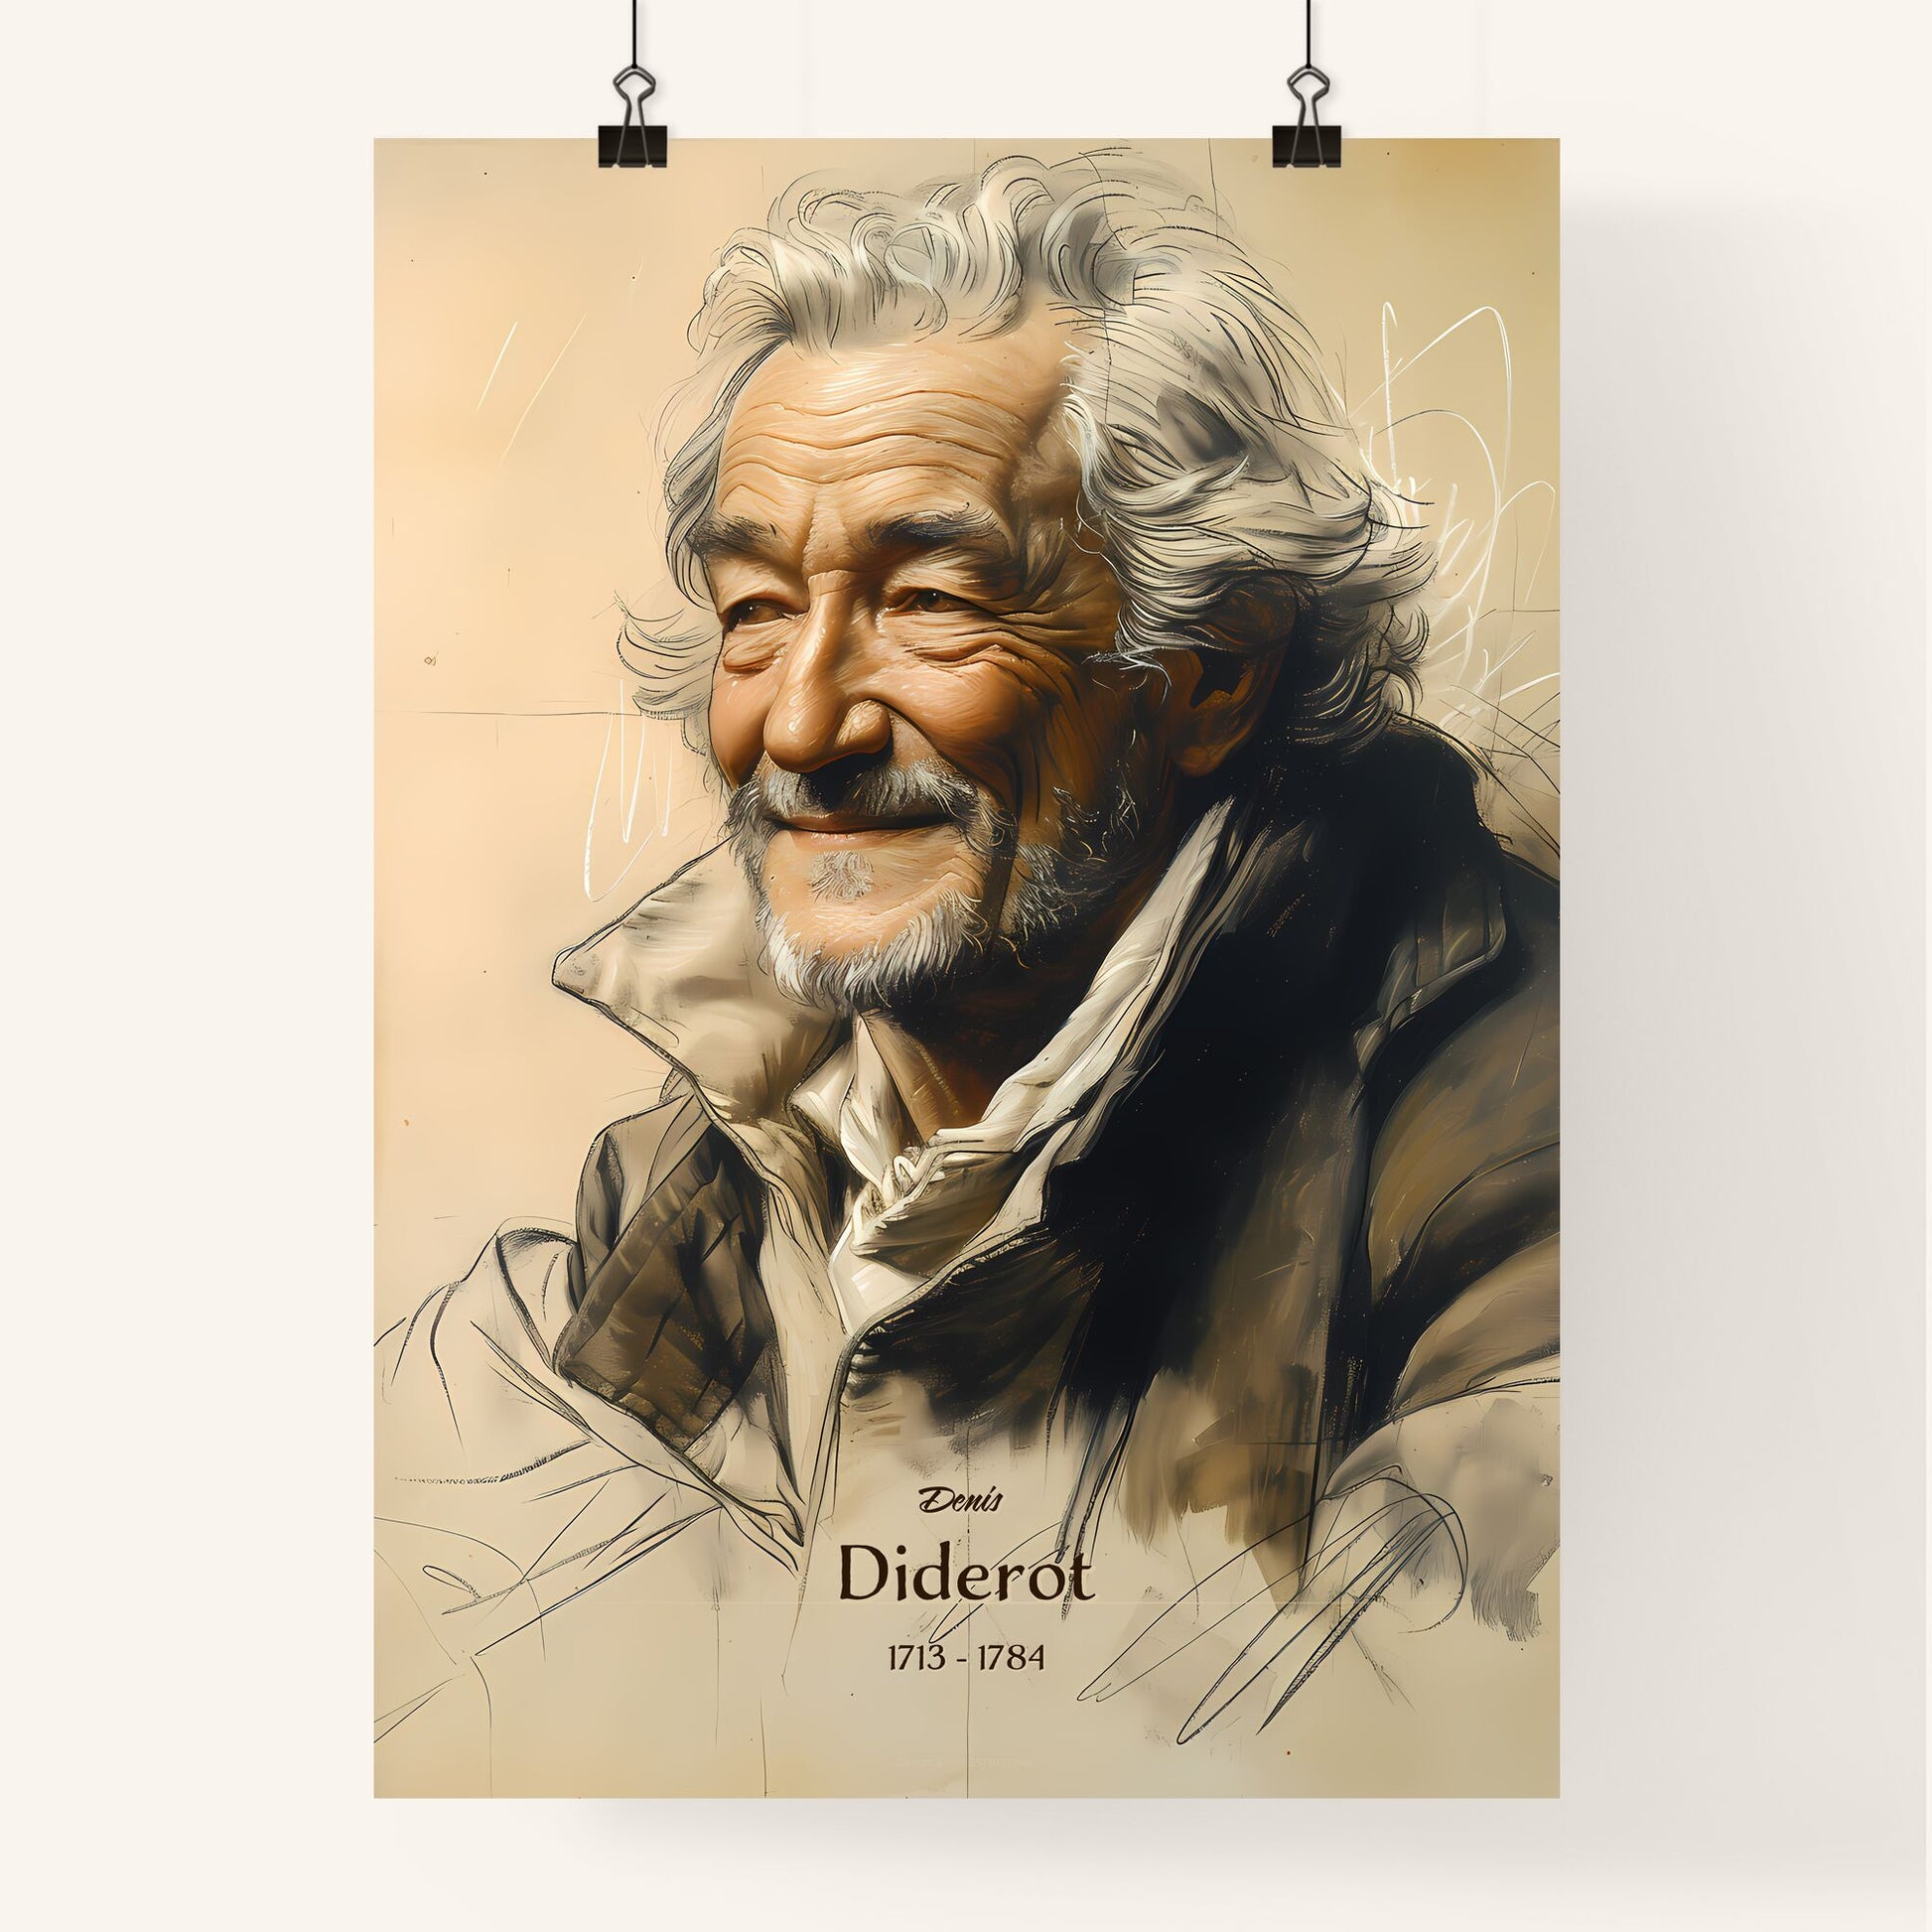 Denis, Diderot, 1713 - 1784, A Poster of a man with white hair and beard smiling Default Title